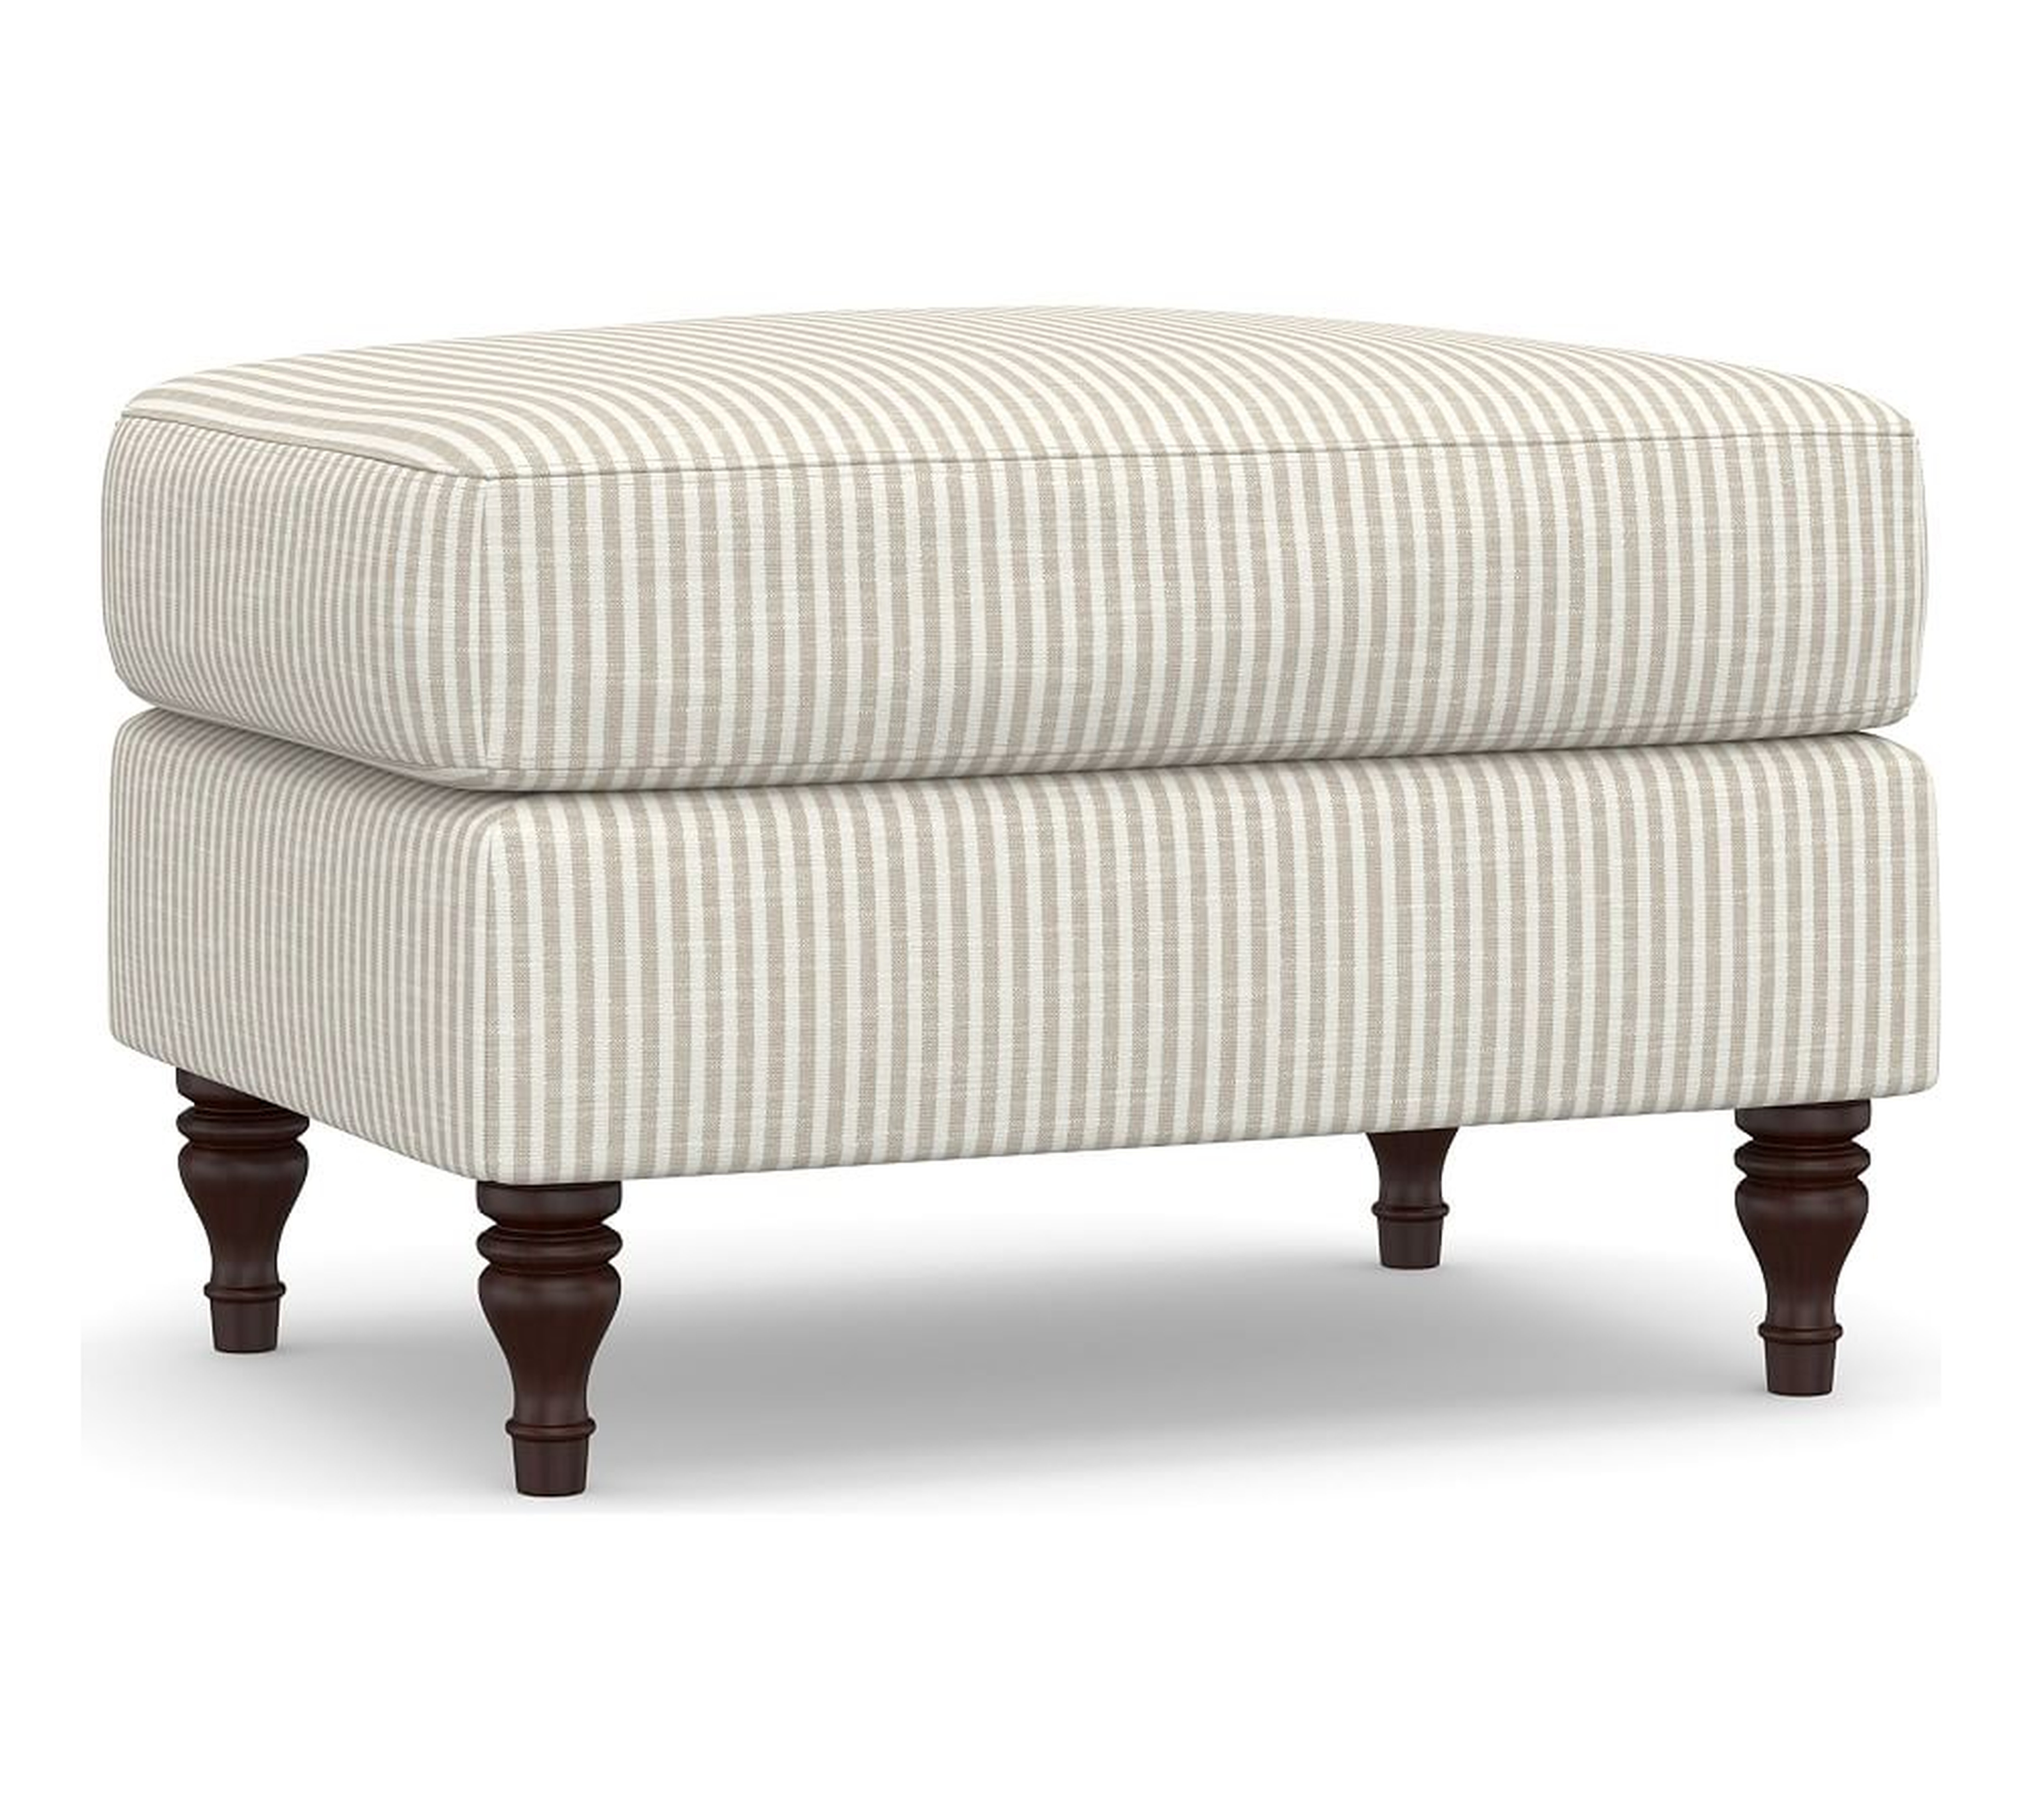 Carlisle English Arm Upholstered Ottoman, Polyester Wrapped Cushions, Classic Stripe Oatmeal - Pottery Barn